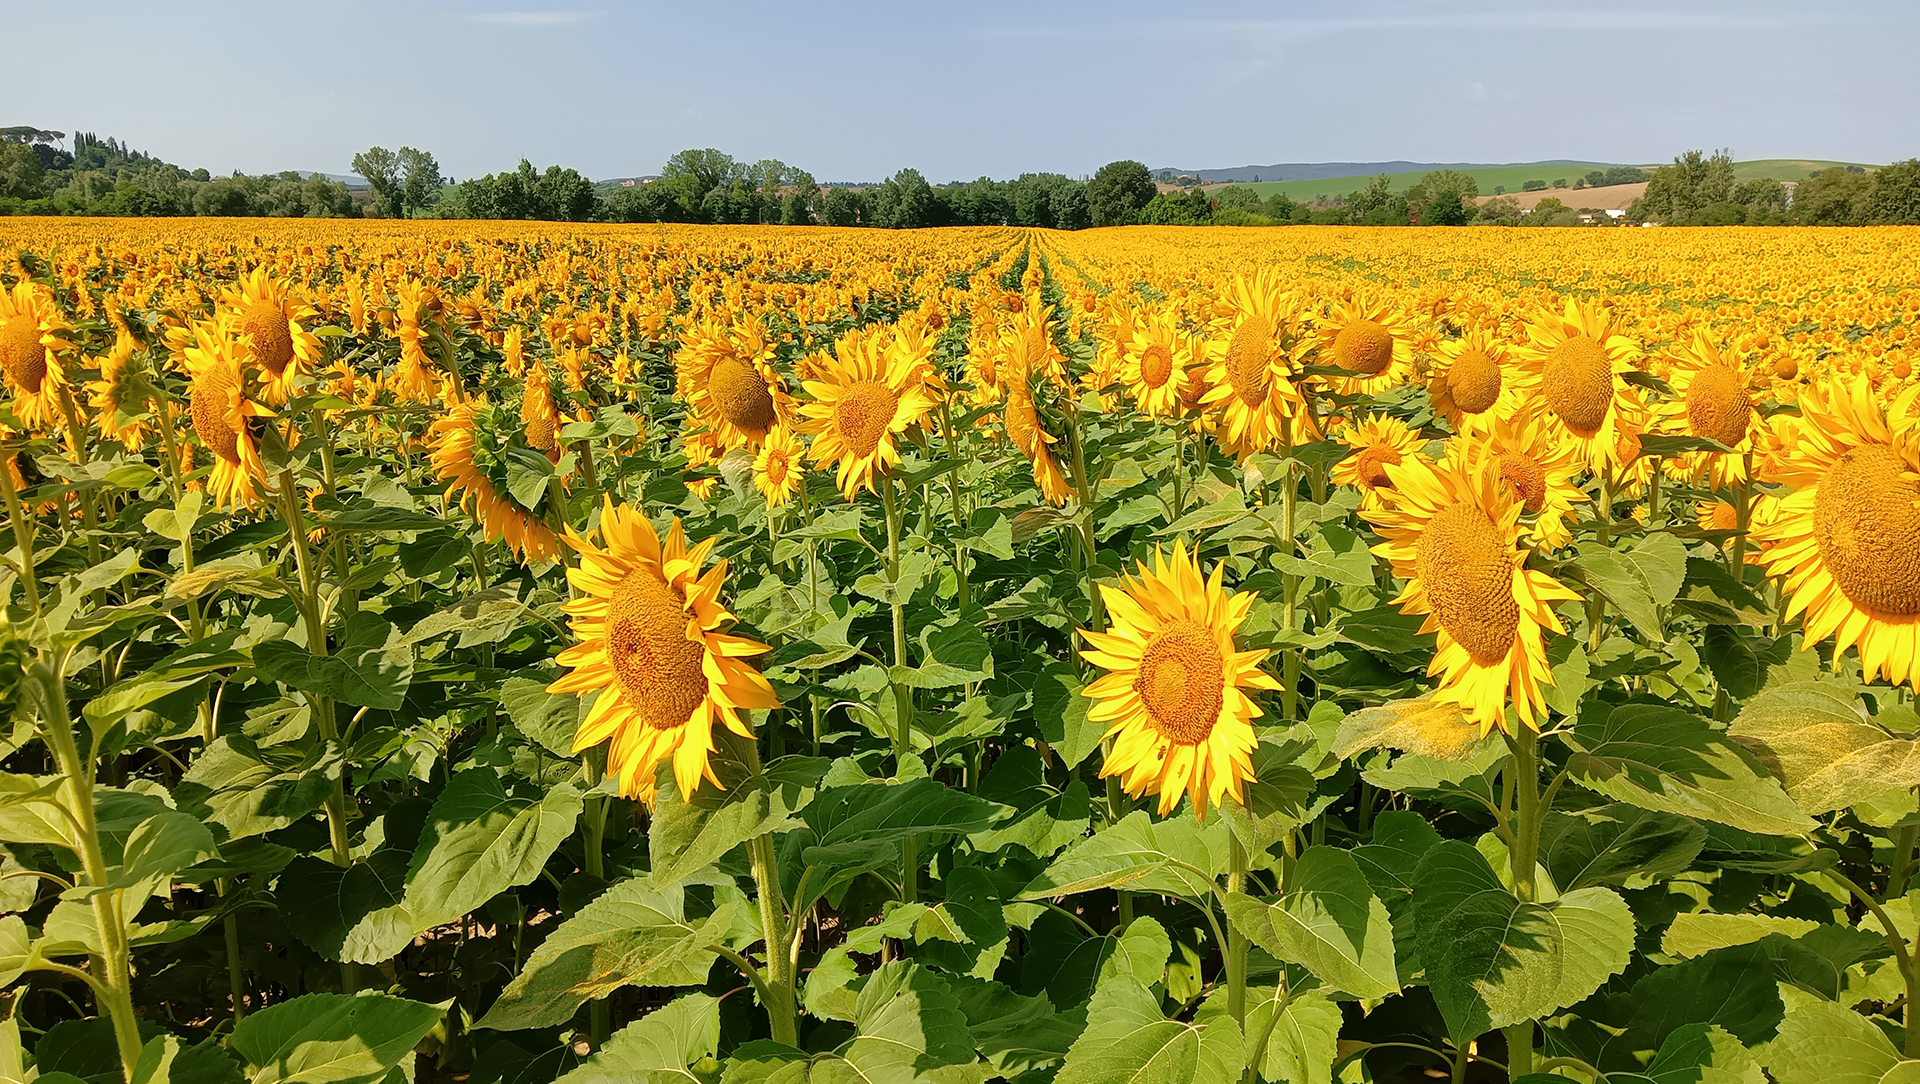 Countryside in Tuscany, landscape sunflowers